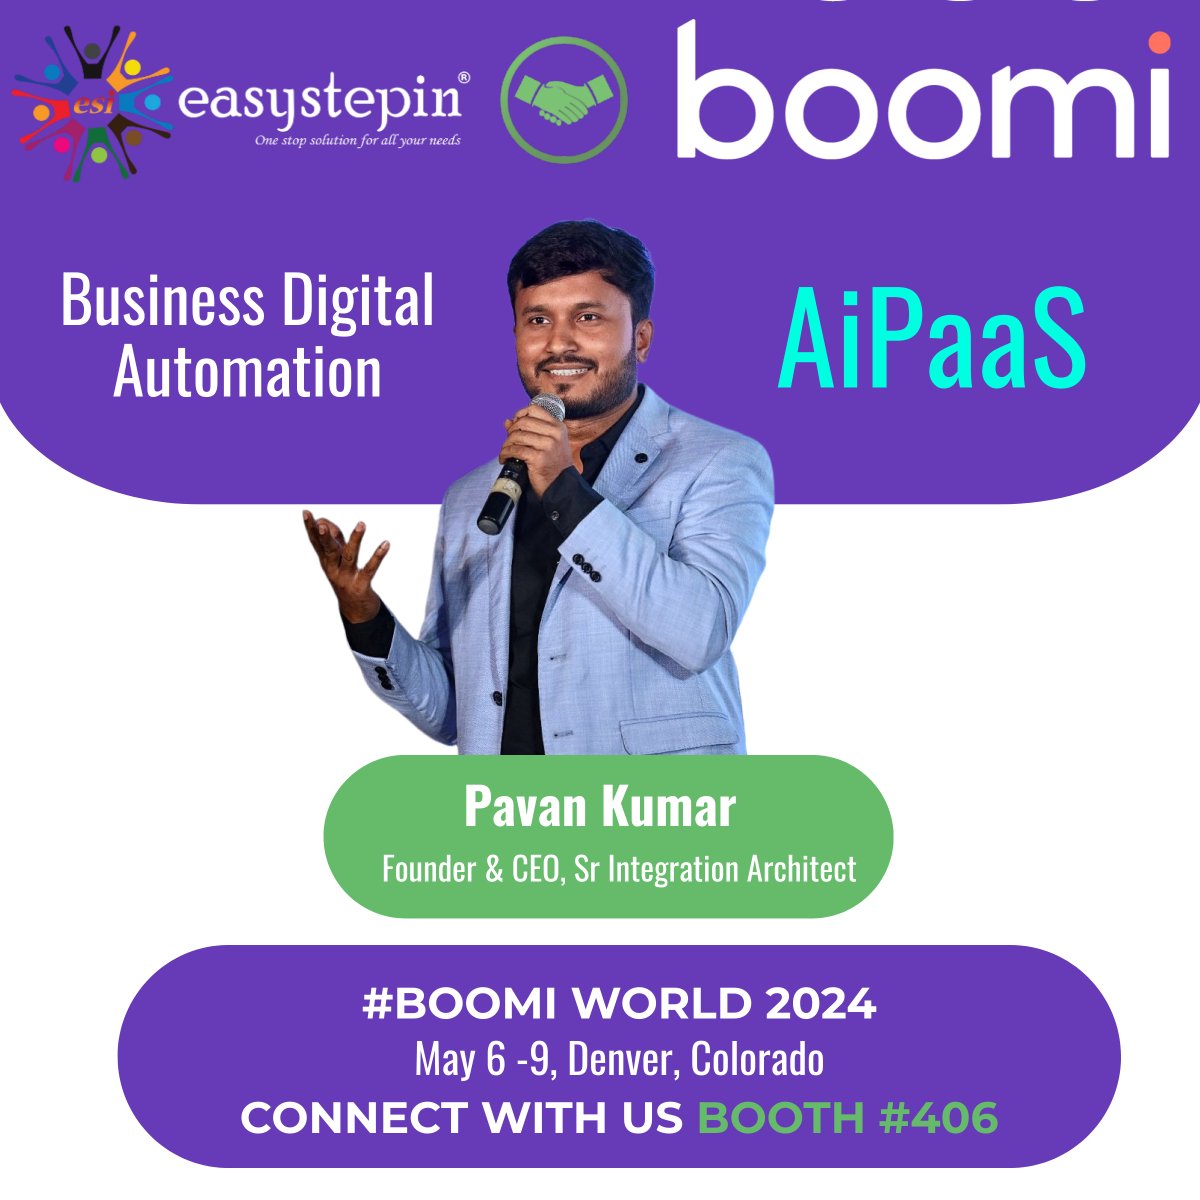 I'm thrilled to announce that EasyStepIn will be sponsoring Boomi 𝐖𝐨𝐫𝐥𝐝 2024 in Denver, Colorado

Join us at Booth #406 to explore the power of 𝐀𝐢𝐏𝐚𝐚𝐒 and discover how it can transform your business.

Let's connect at Boomi World 2024 to discuss your integration needs